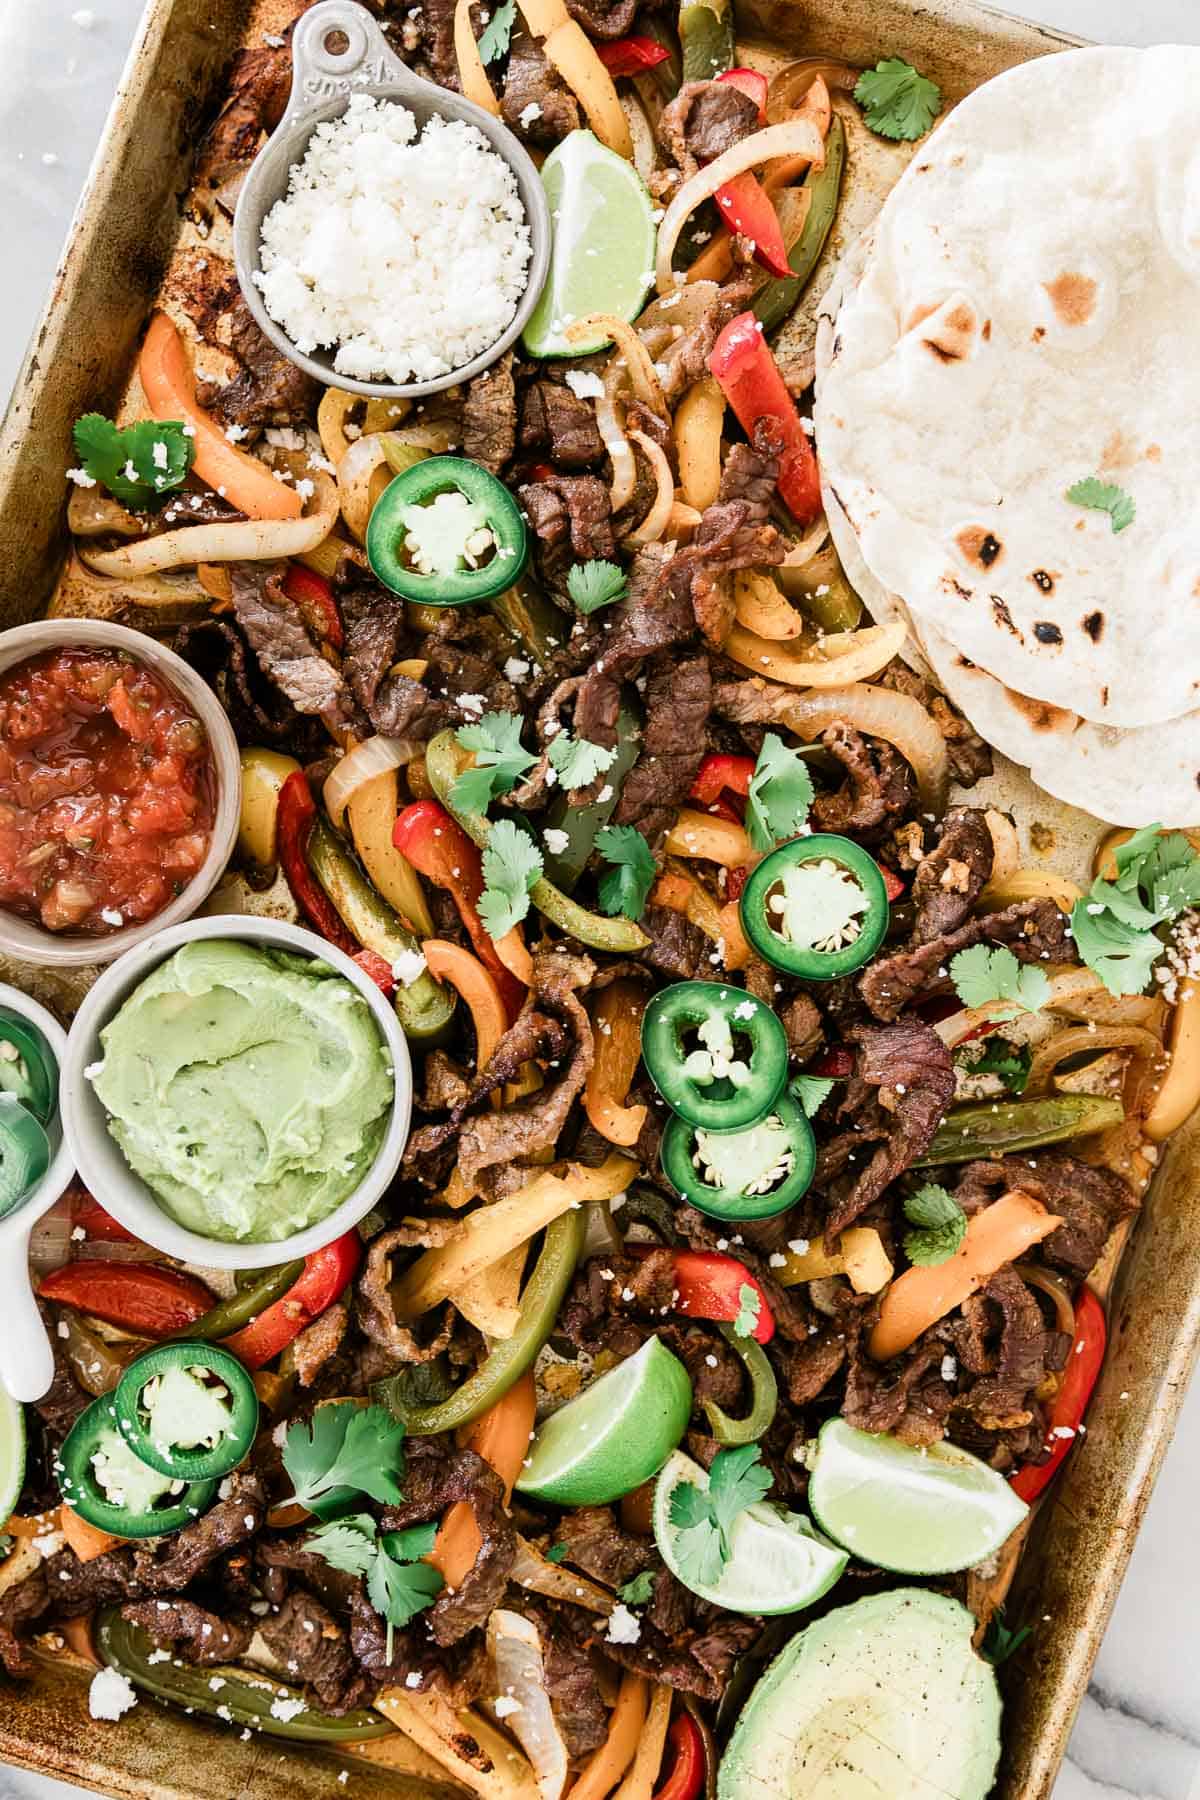 Sheet pan steak fajitas on a sheet tray. There are tortillas, condiments, limes, and jalapeños also on the tray.